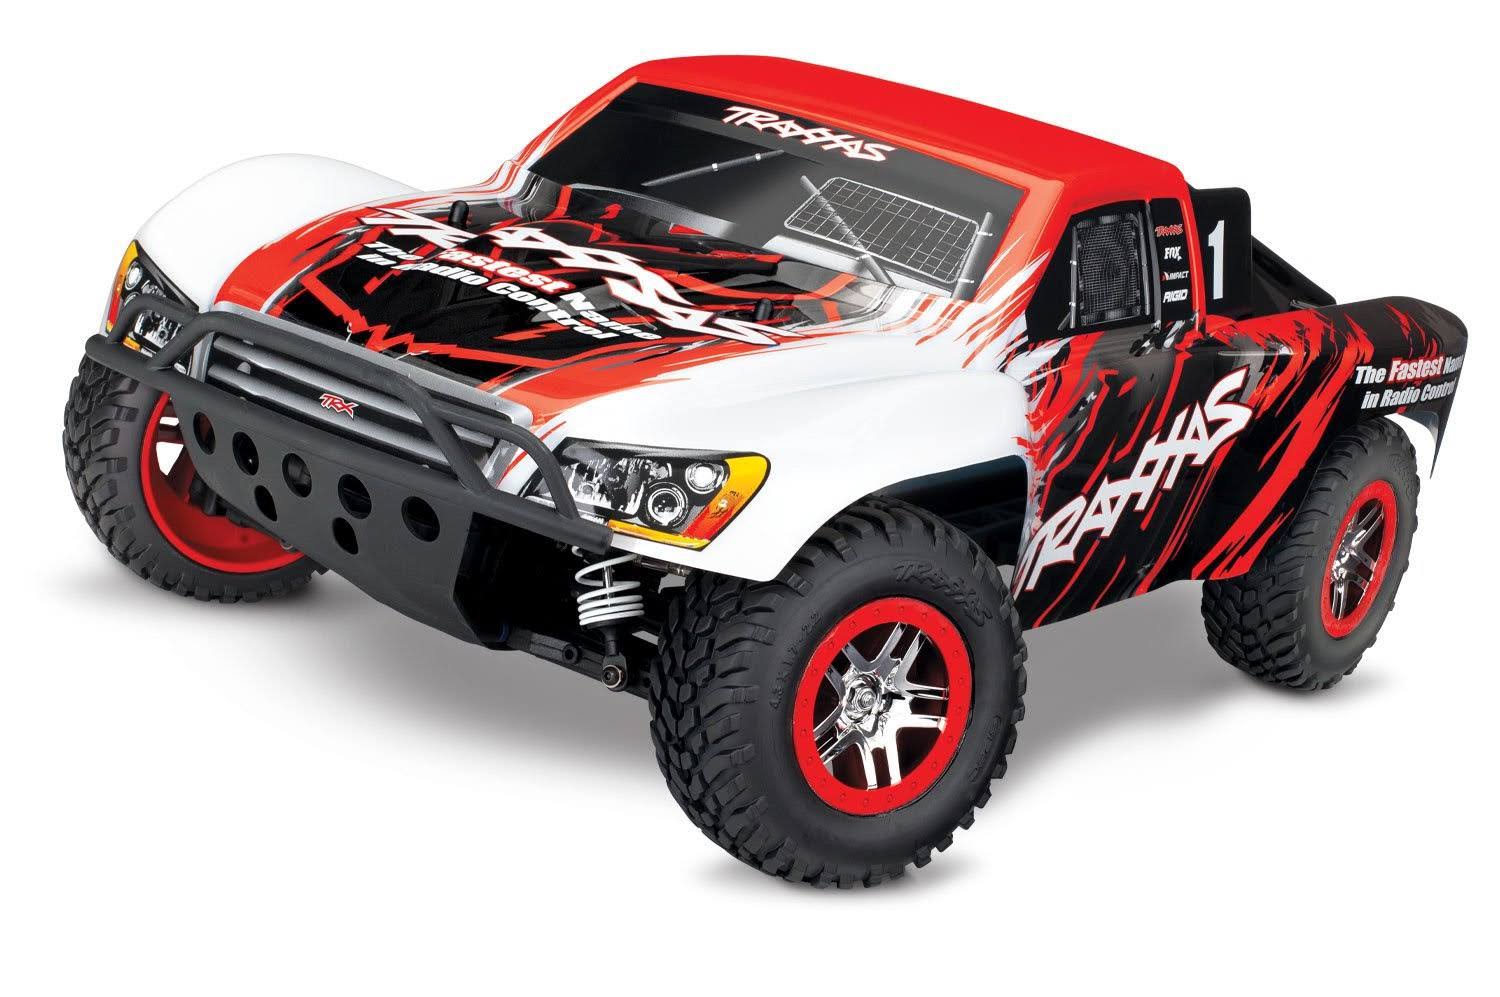 Traxxas Slash 4x4 VXL 1/10 Scale 4WD Brushless Short-Course Truck, Red